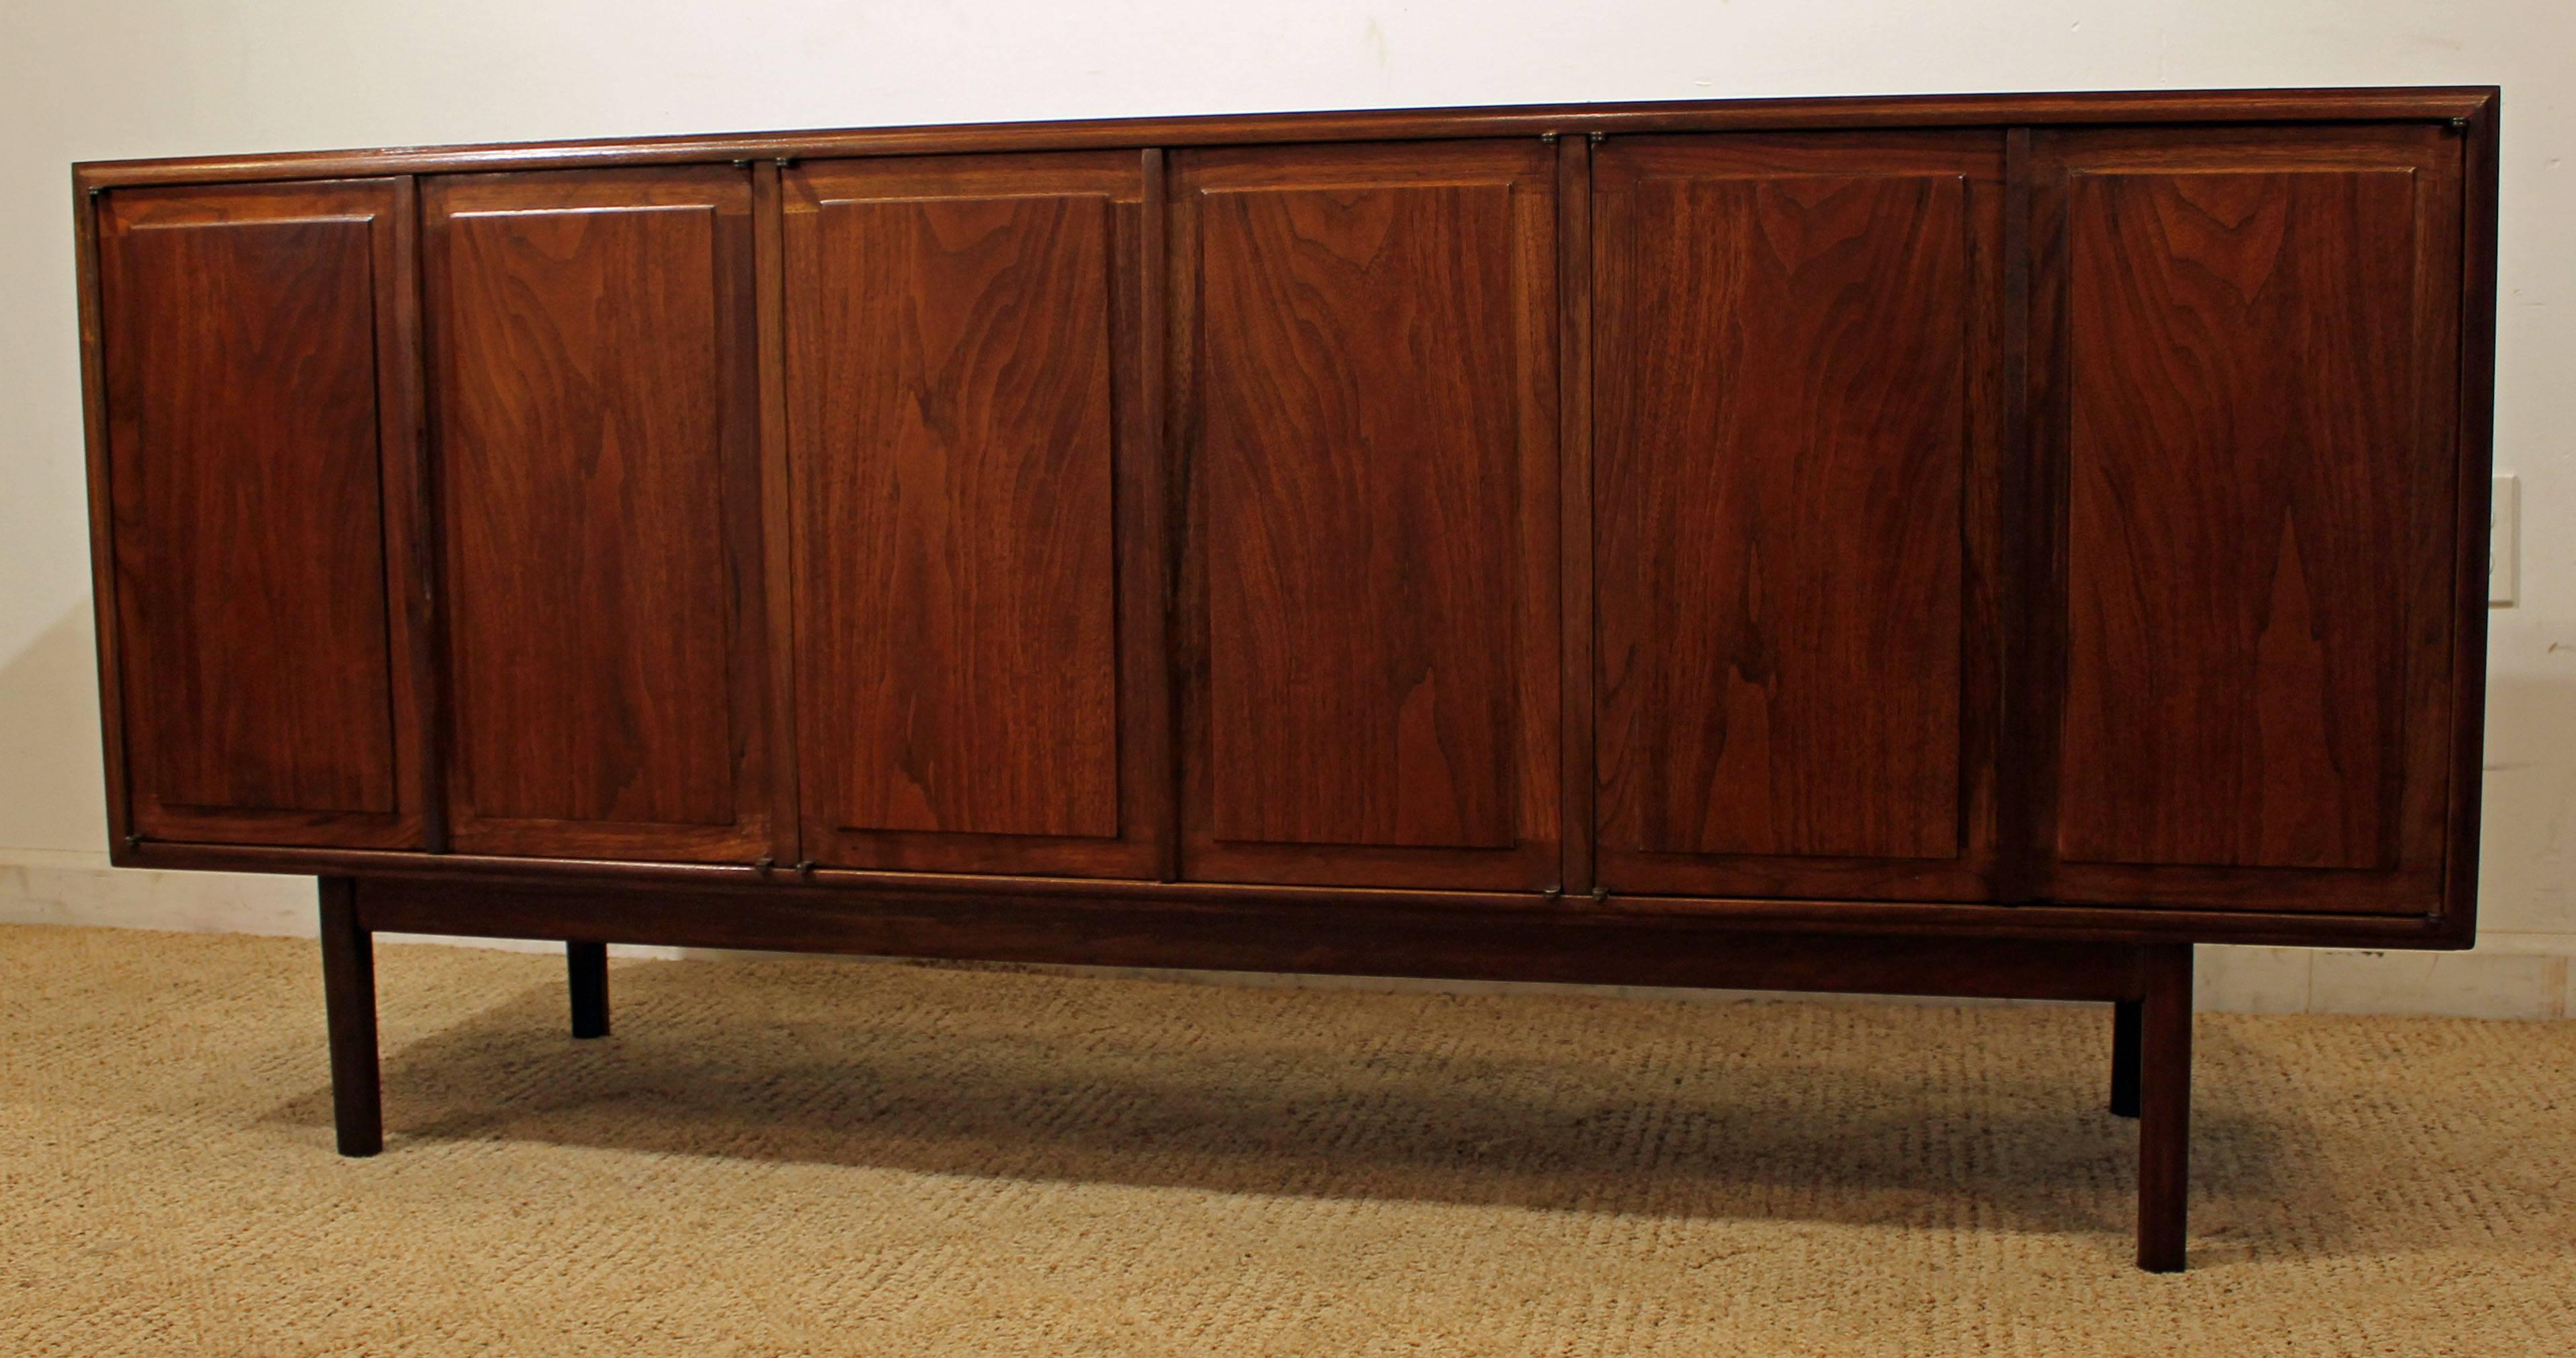 Offered is a Mid-Century Modern walnut credenza designed by Jack Cartwright for Founders. It is walnut, offering ample room for storage, with 6 doors, 3 drawers, and shelving. It has been refinished.


Dimension:
67